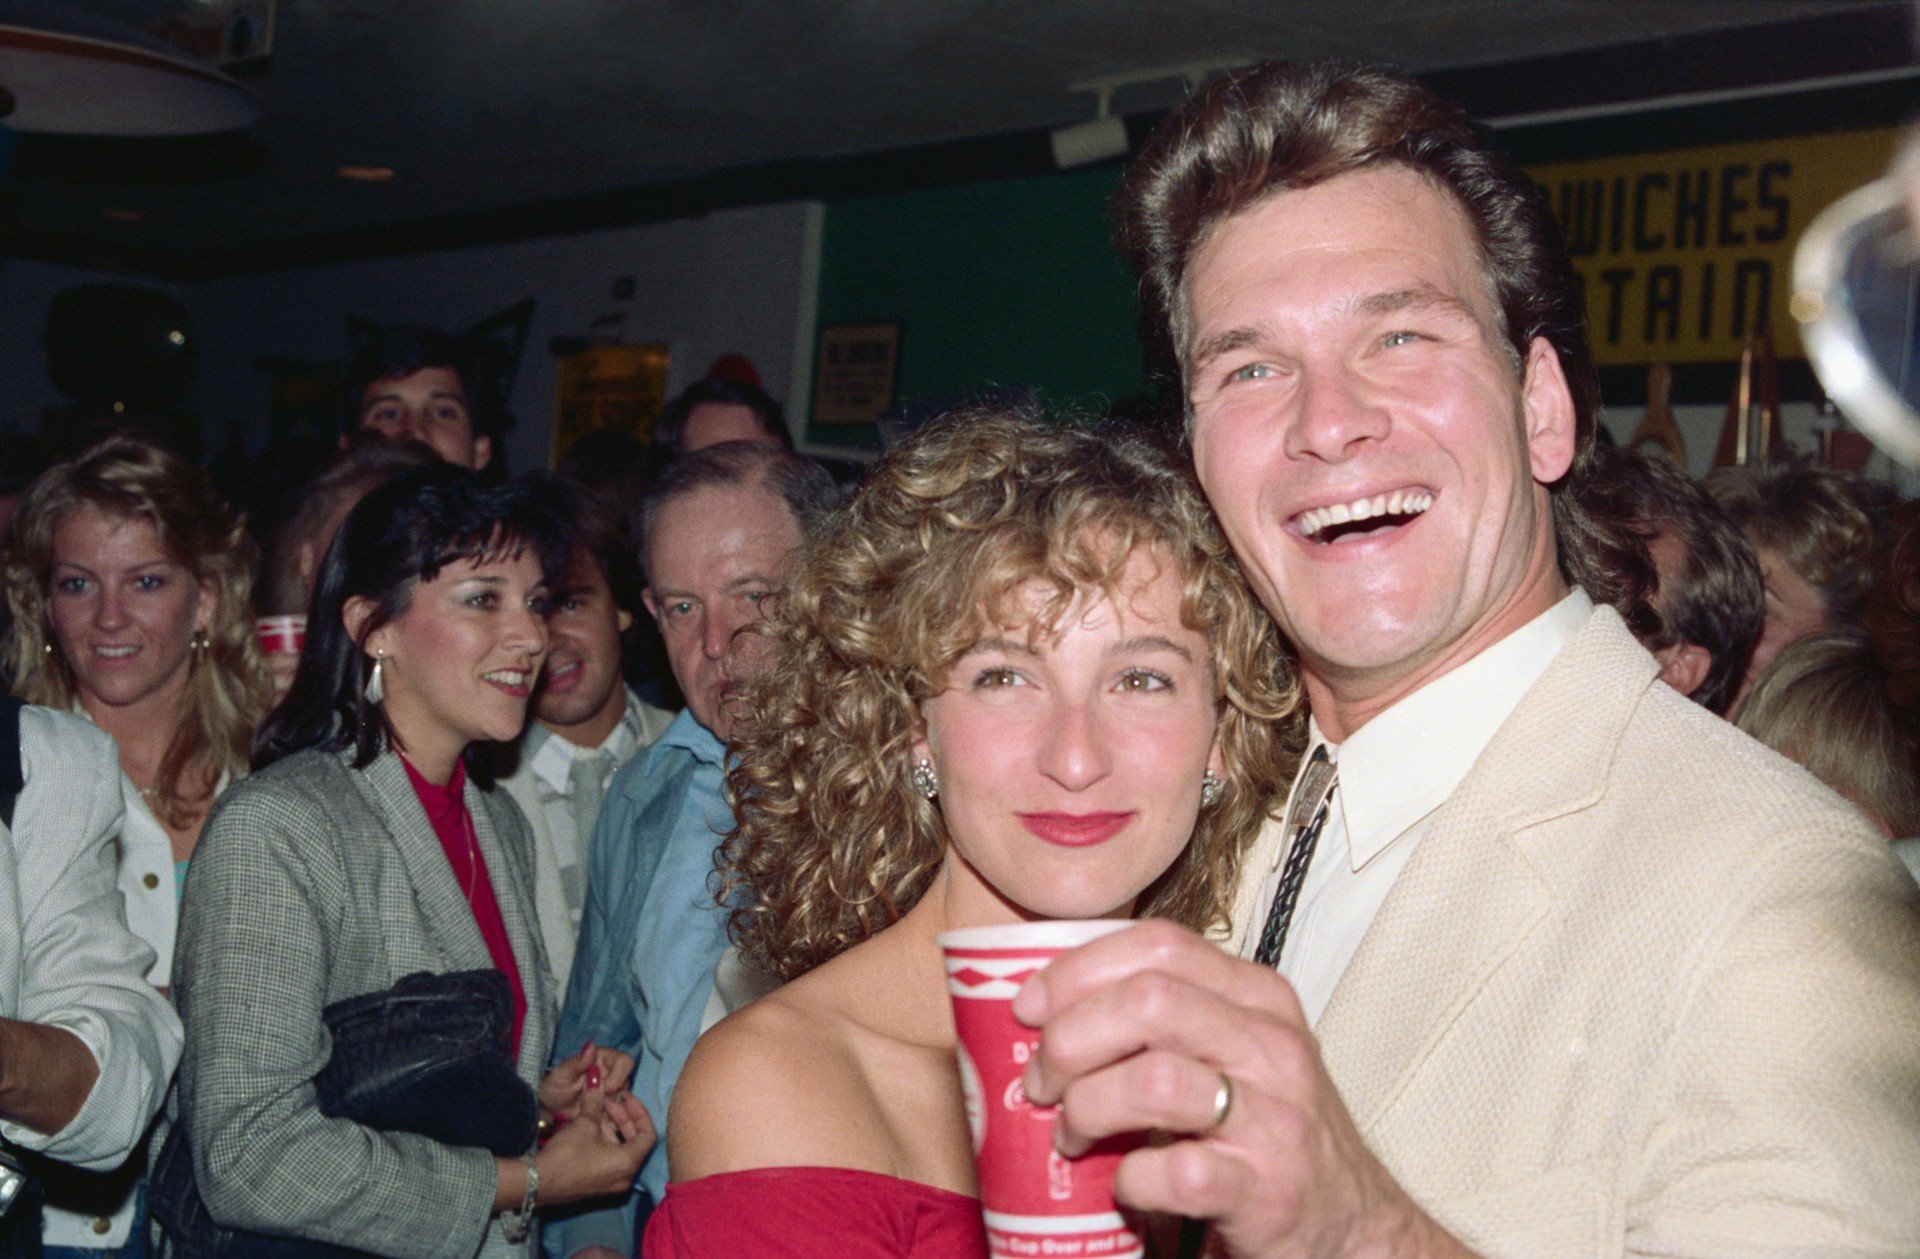 Jennifer Grey and Patrick Swayze laugh together at a media event.